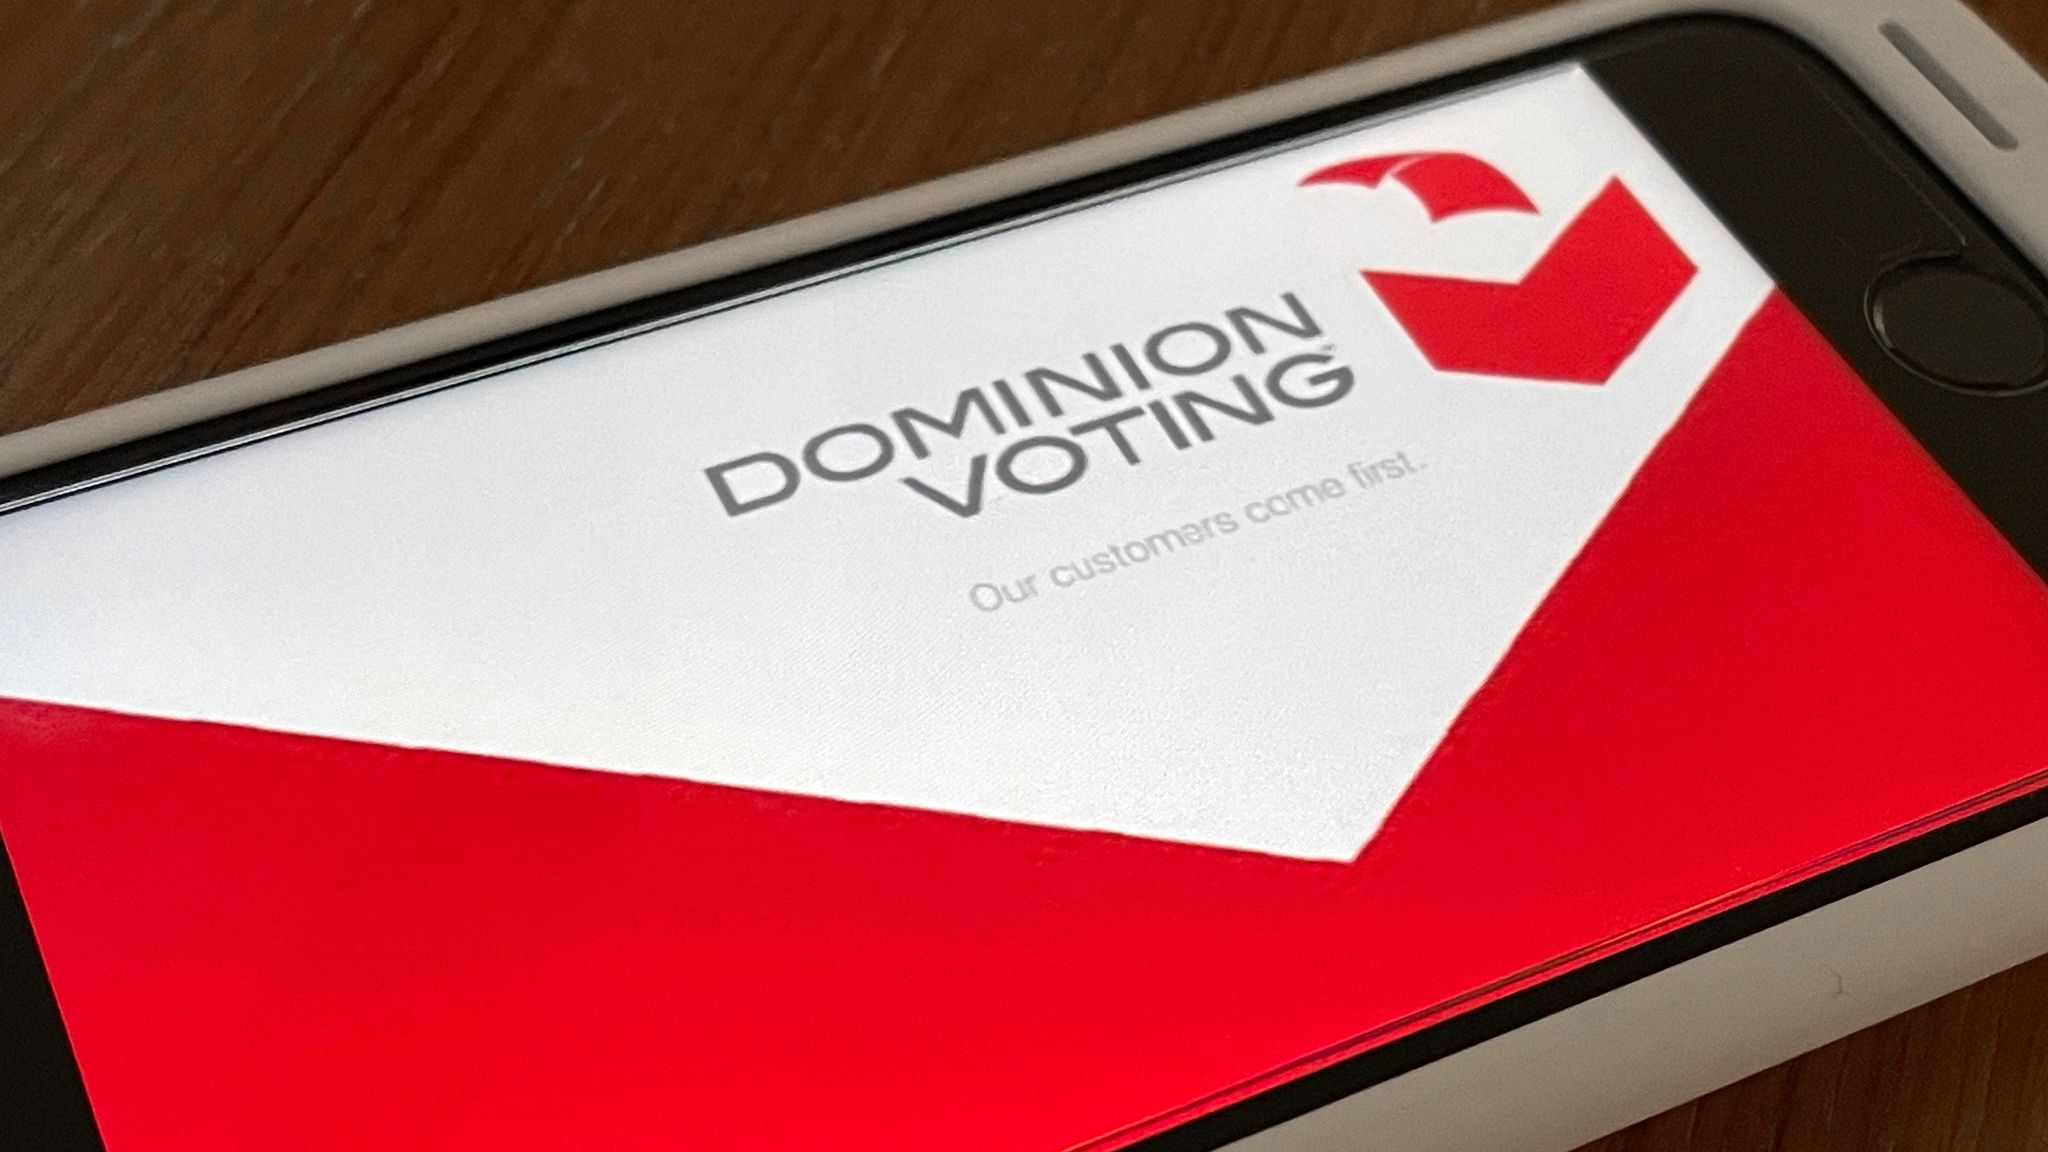 Fox News sued by Dominion Voting Systems for 1.6bn over bogus 2020